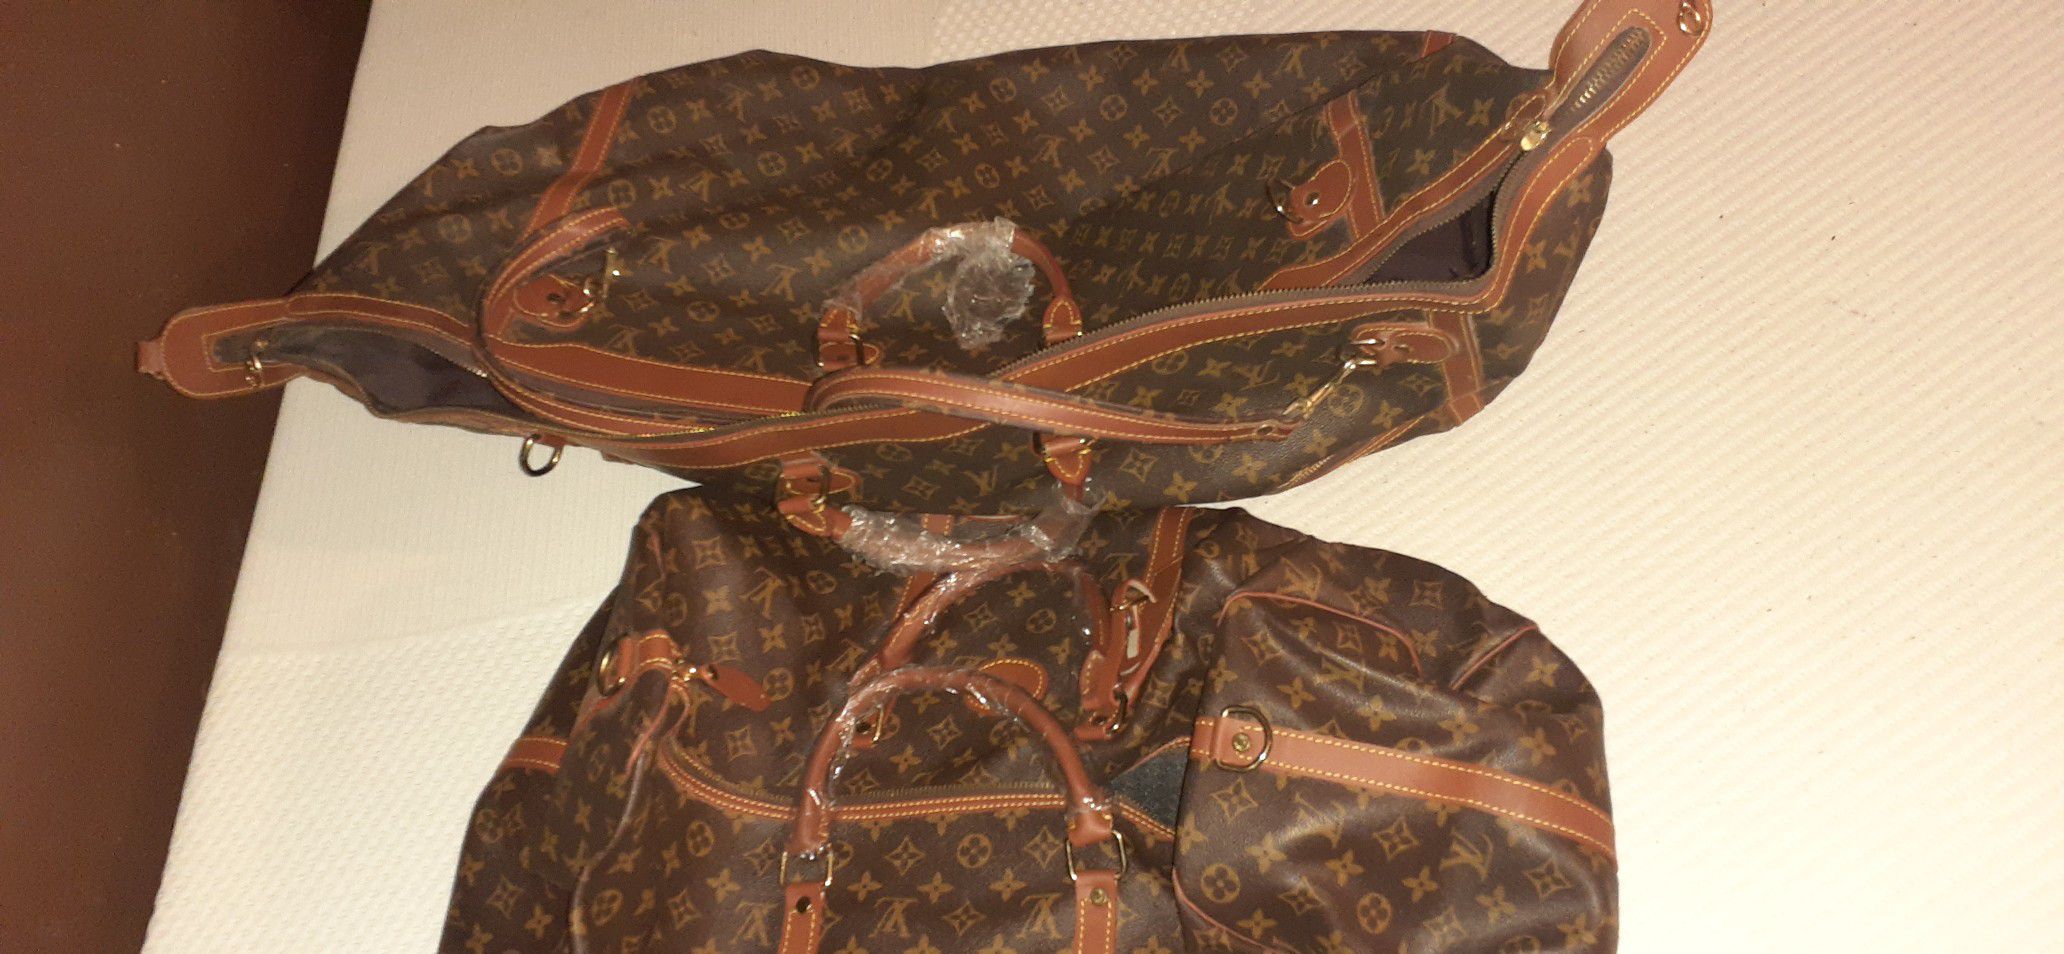 Louis Vuitton large duffle bags other bags available as well $500for large duffle bags